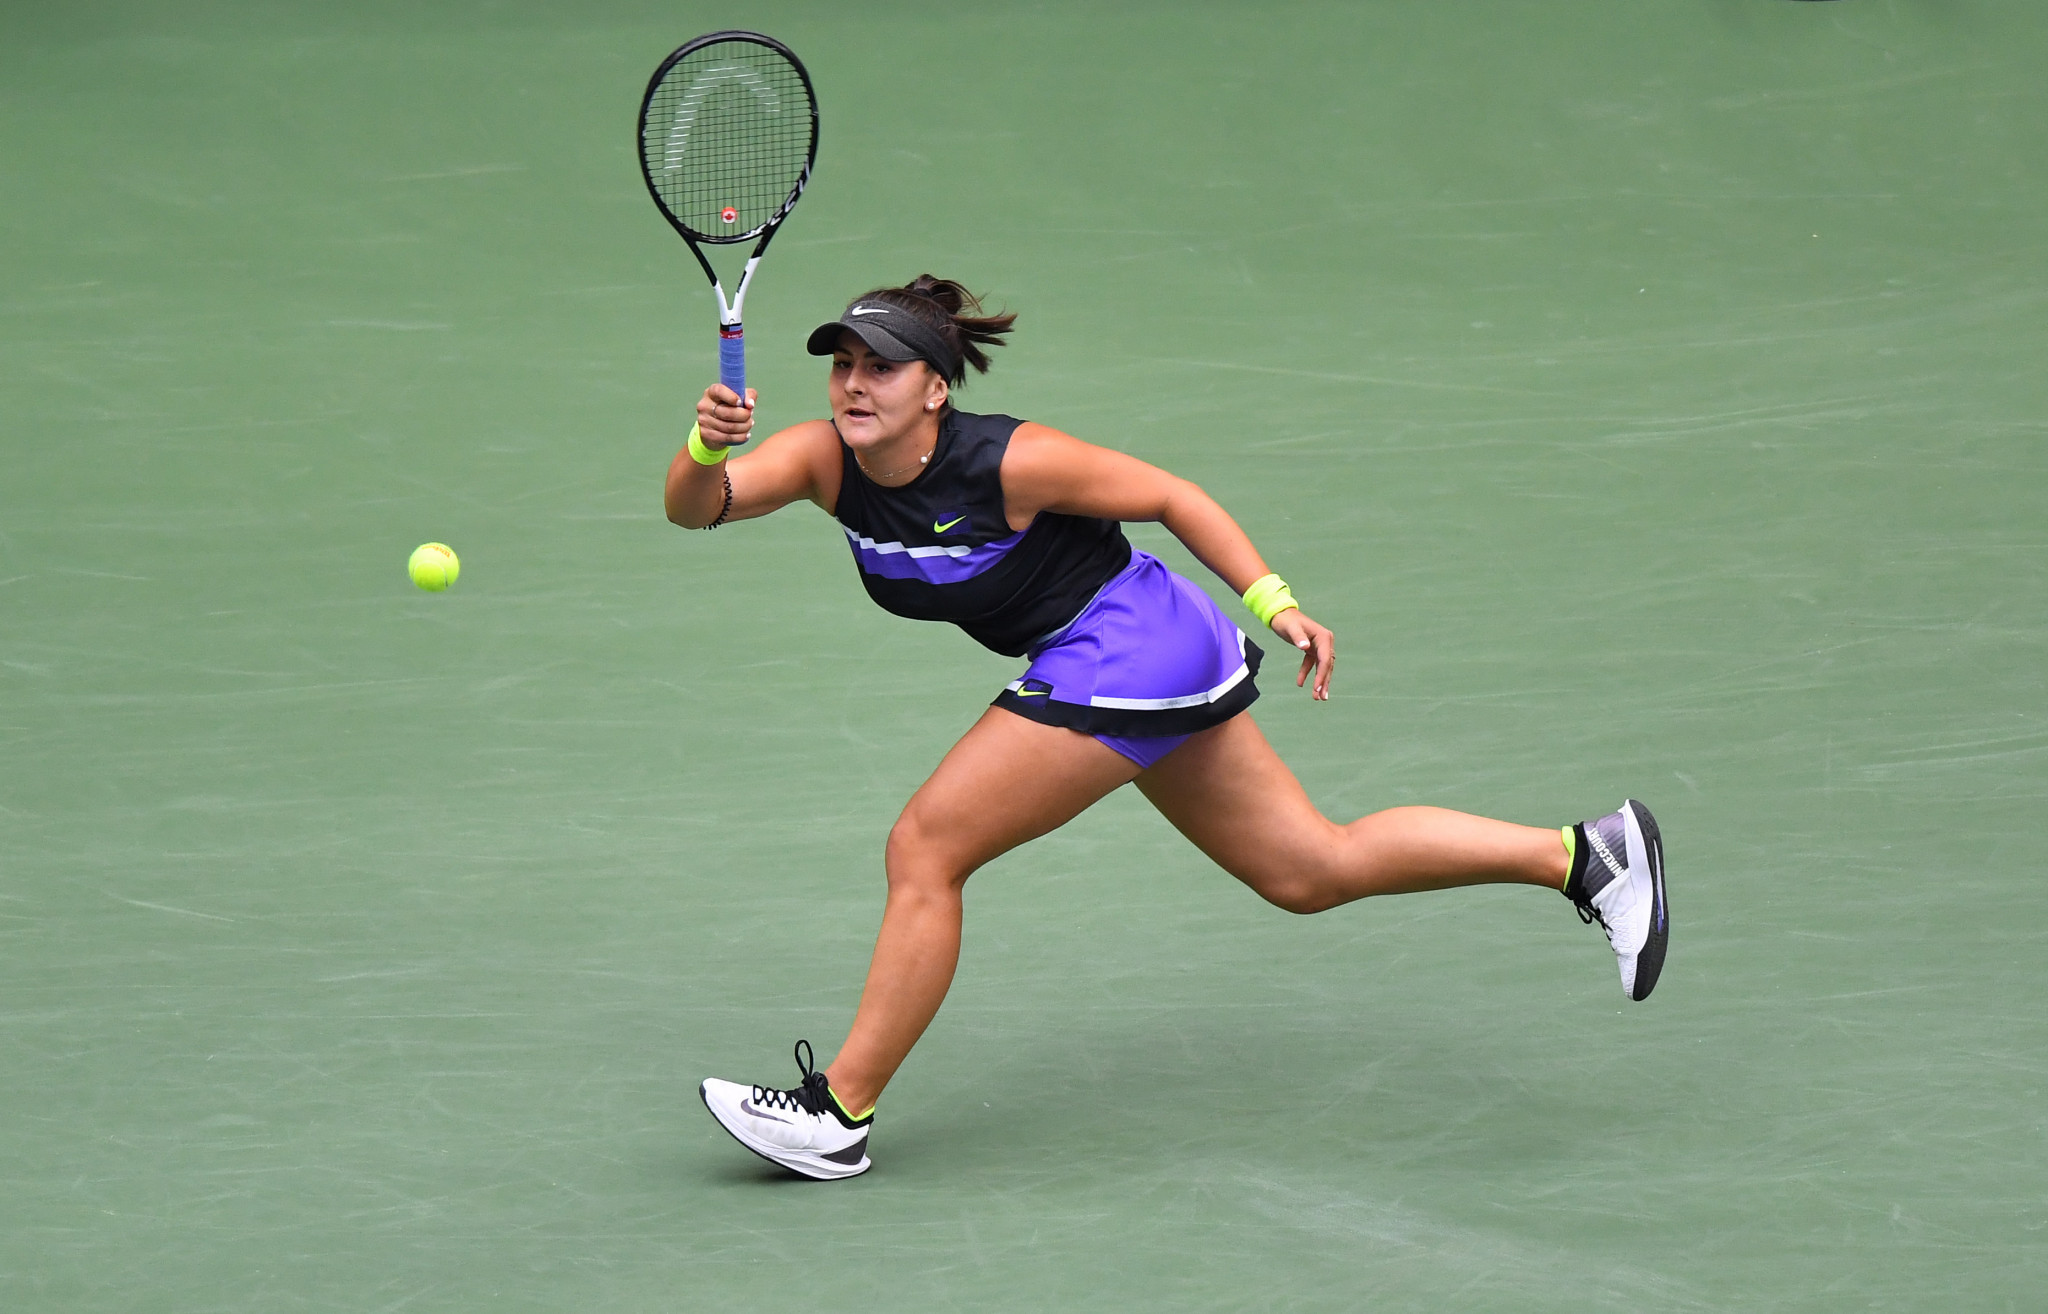 Bianca Andreescu won the US Open in 2019 ©Getty Images